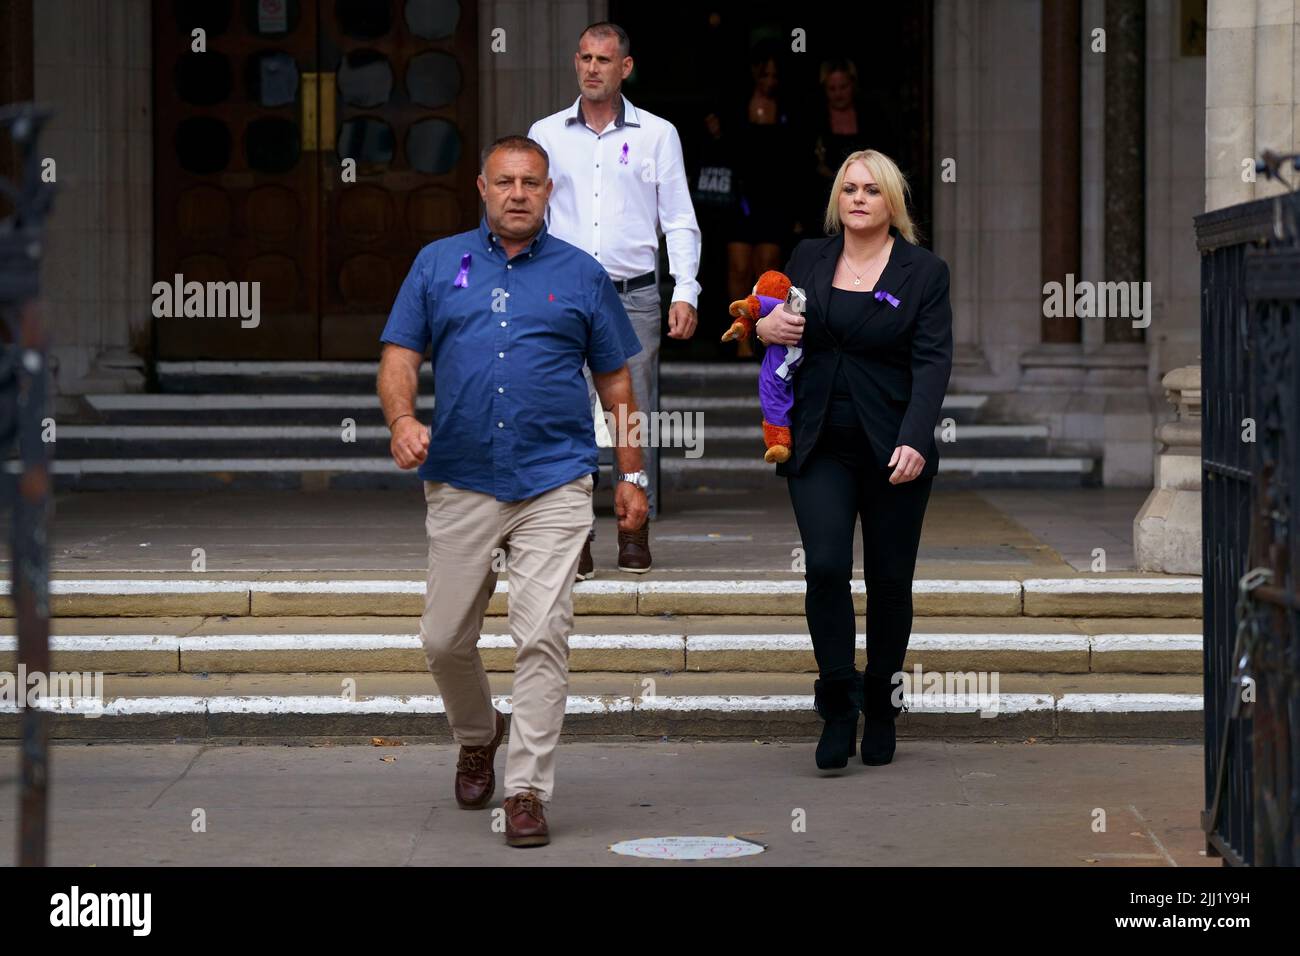 The parents of Archie Battersbee, Paul Battersbee and Hollie Dance, leave the Royal Courts Of Justice in London, they want Court of Appeal judges to overturn a ruling by High Court judge Mr Justice Hayden, who decided that life-support treatment for their 12-year-old son who suffered a 'devastating' brain injury could stop. Picture date: Friday July 22, 2022. Stock Photo